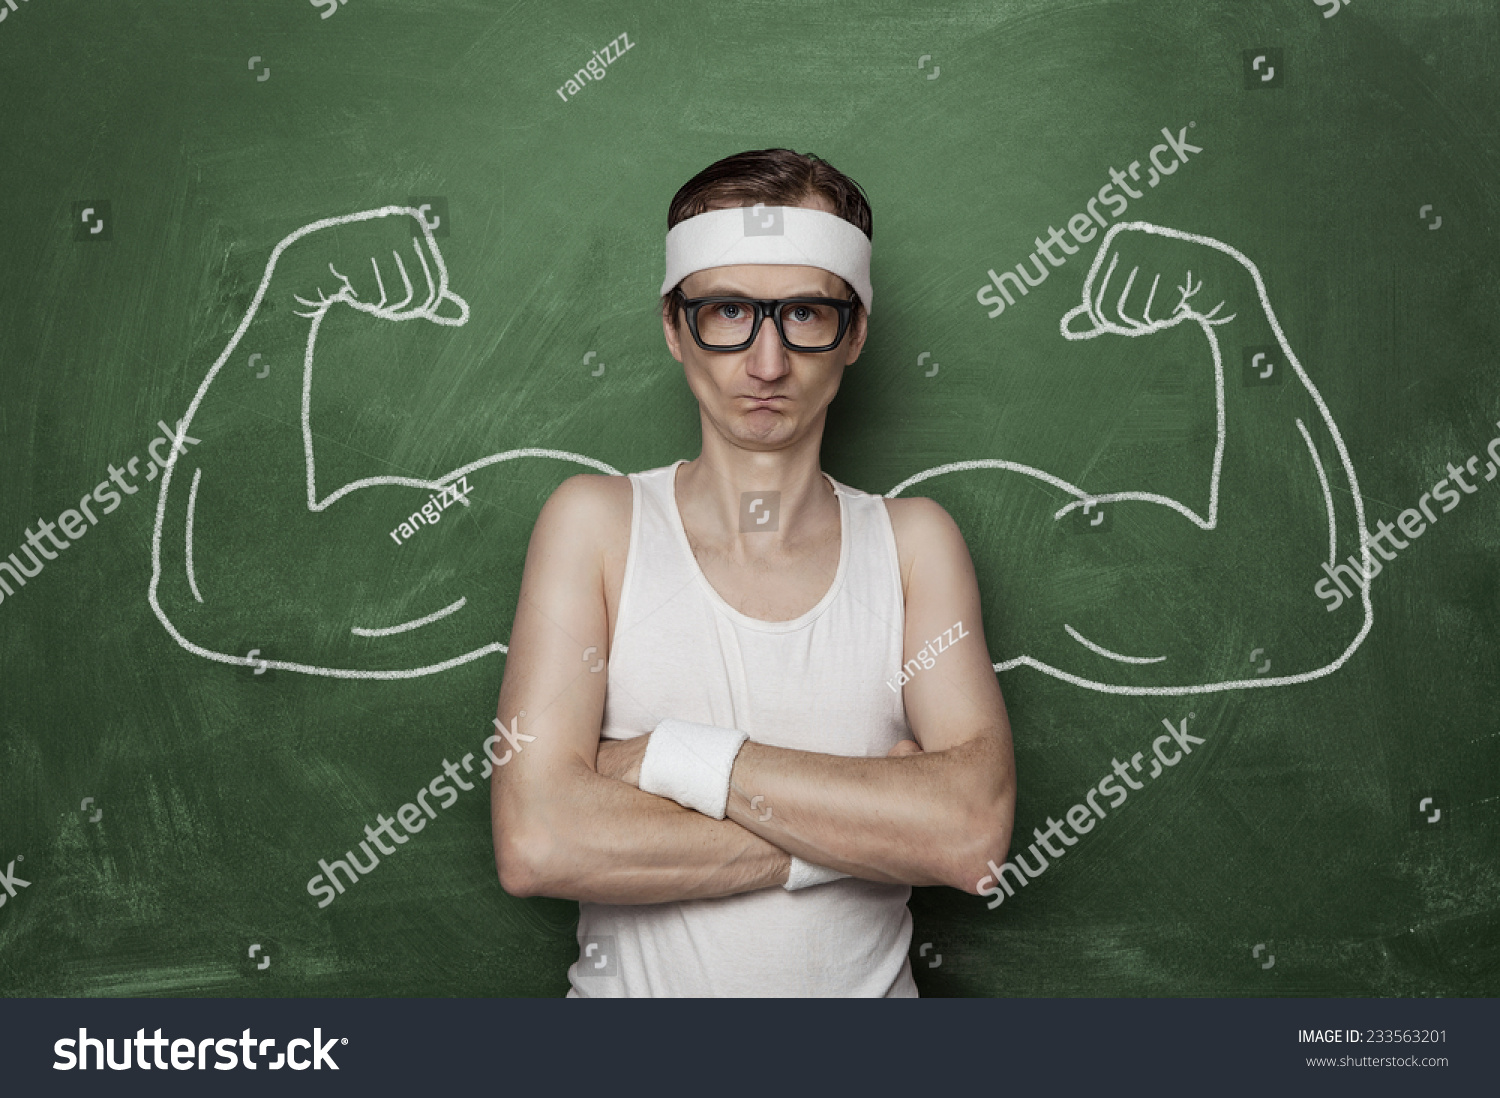 stock-photo-funny-sport-nerd-with-huge-fake-muscle-arms-drawn-on-the-chalkboard-233563201.jpg